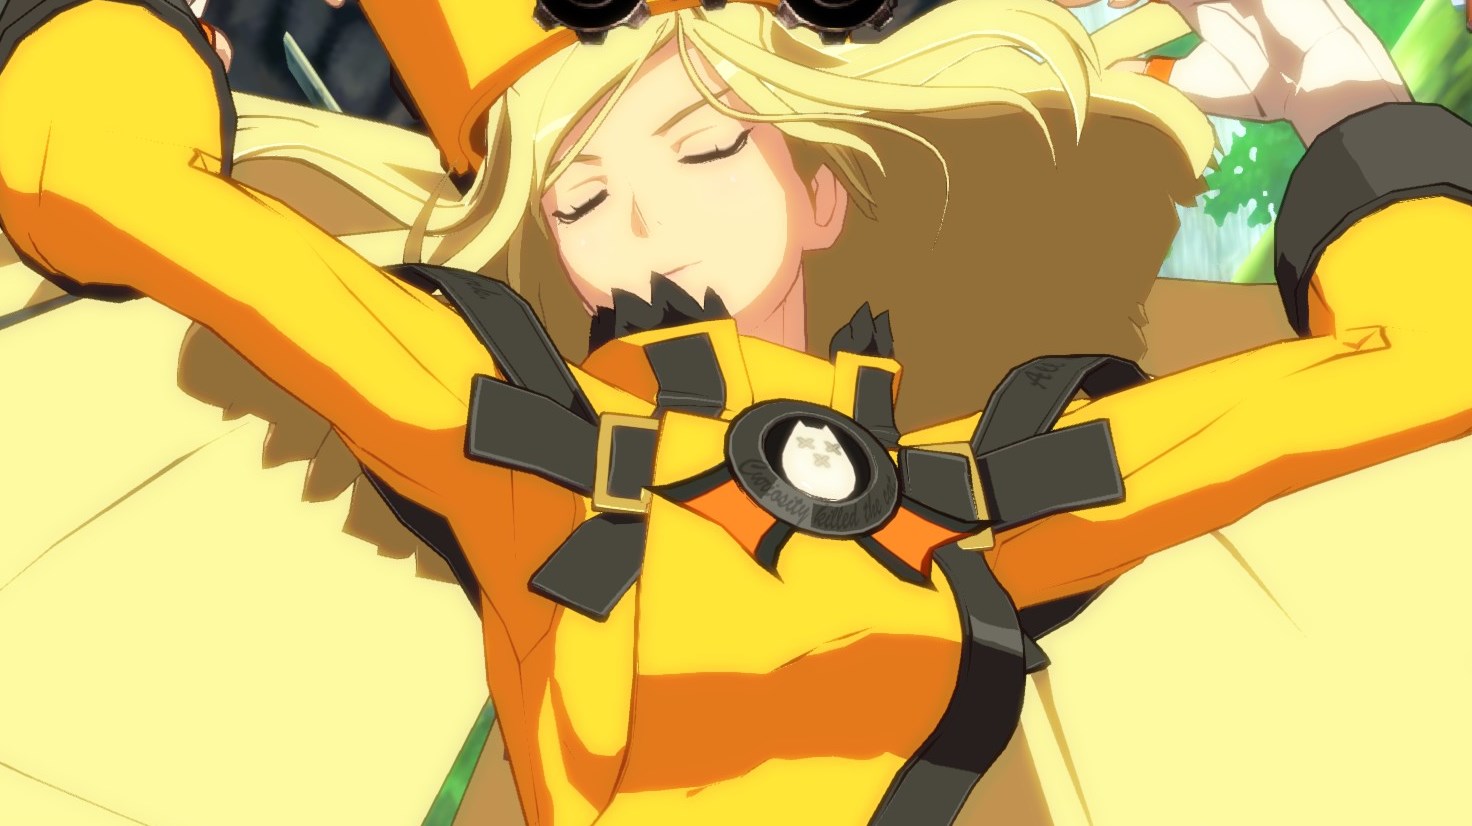 Guilty Gear Xrd Sign Four More Arc System Works Games Are Steam Bound Pc Gamer